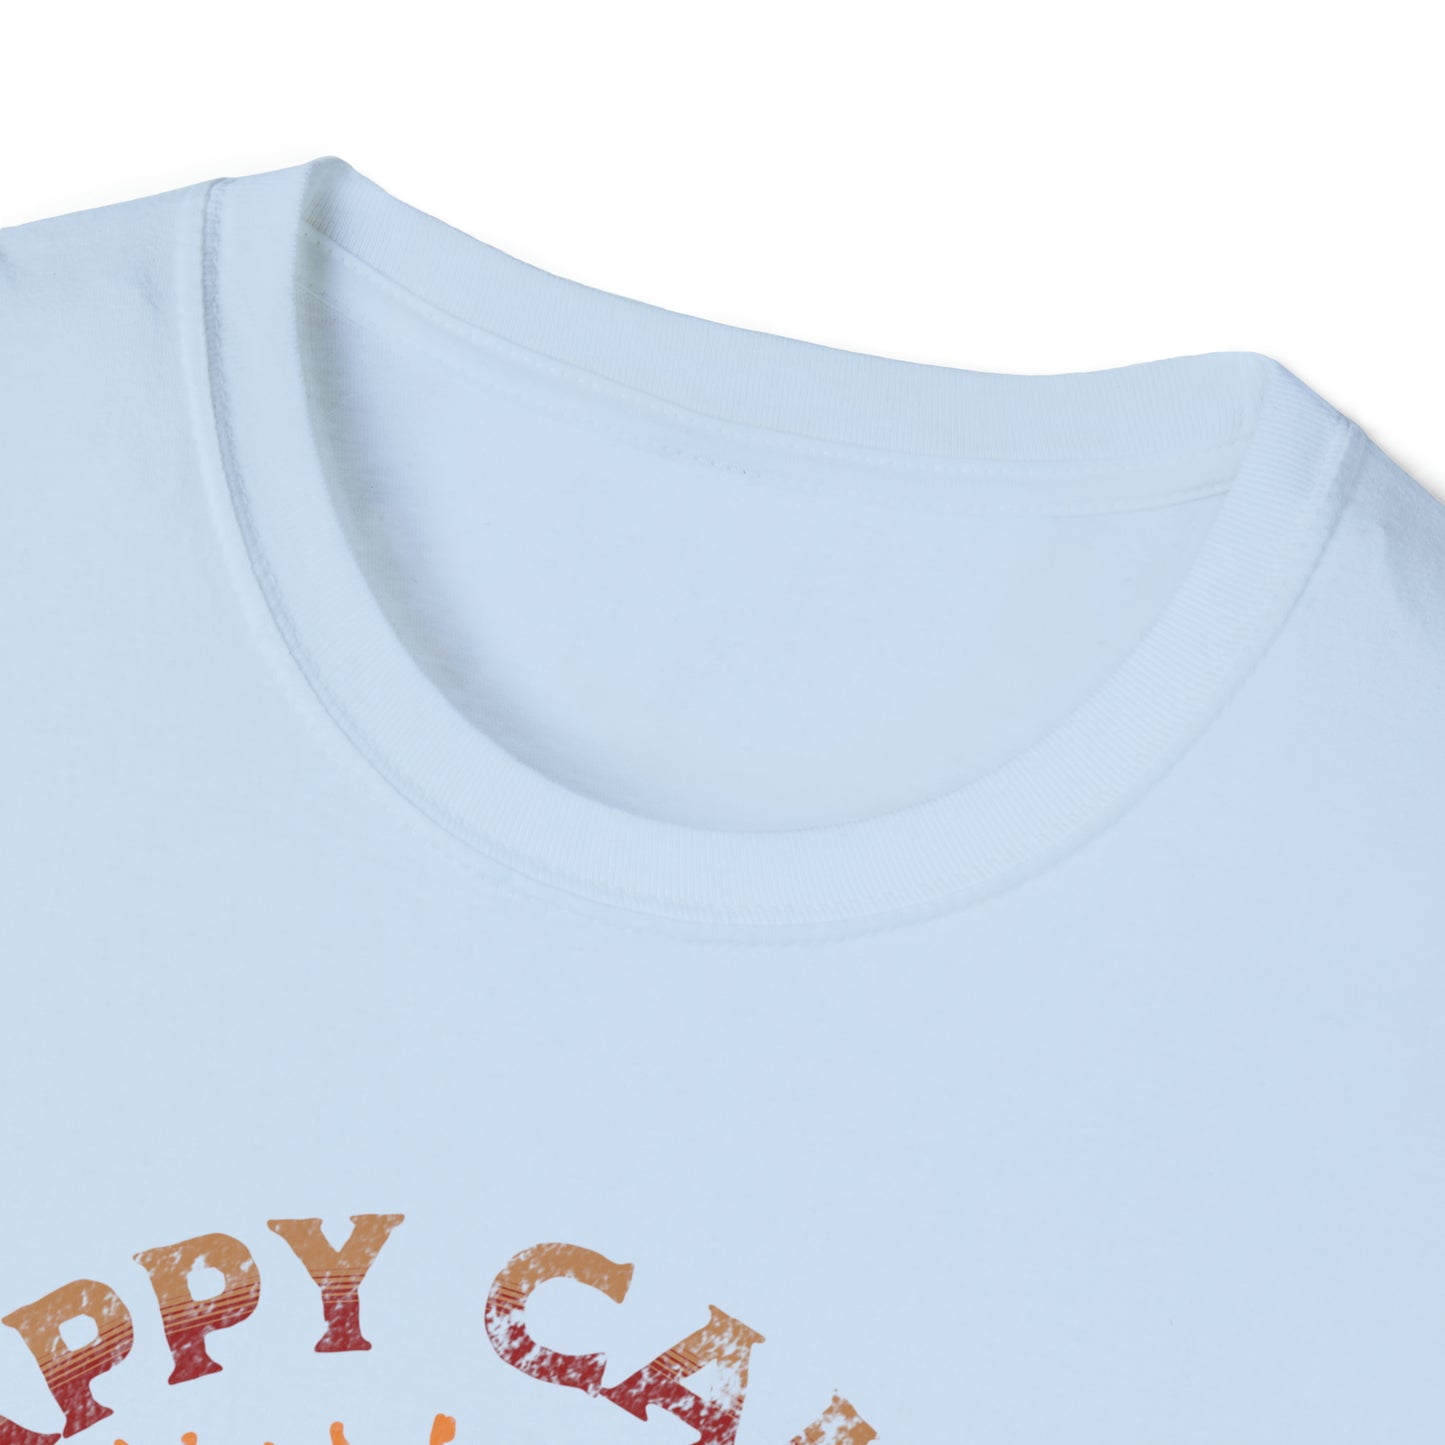 Happy Camper - Unisex Softstyle T-Shirt